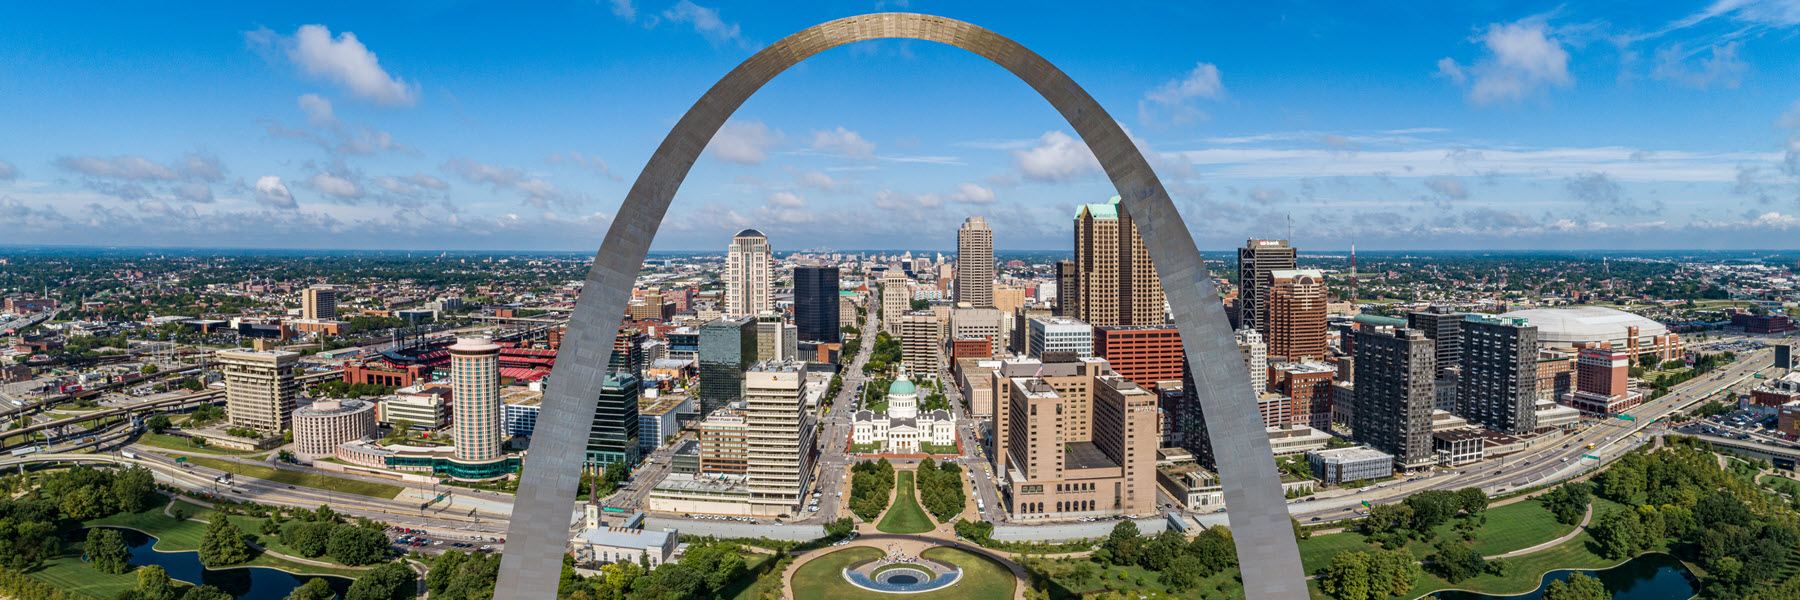 The Gateway Arch rises above the downtown St. Louis Skyline.